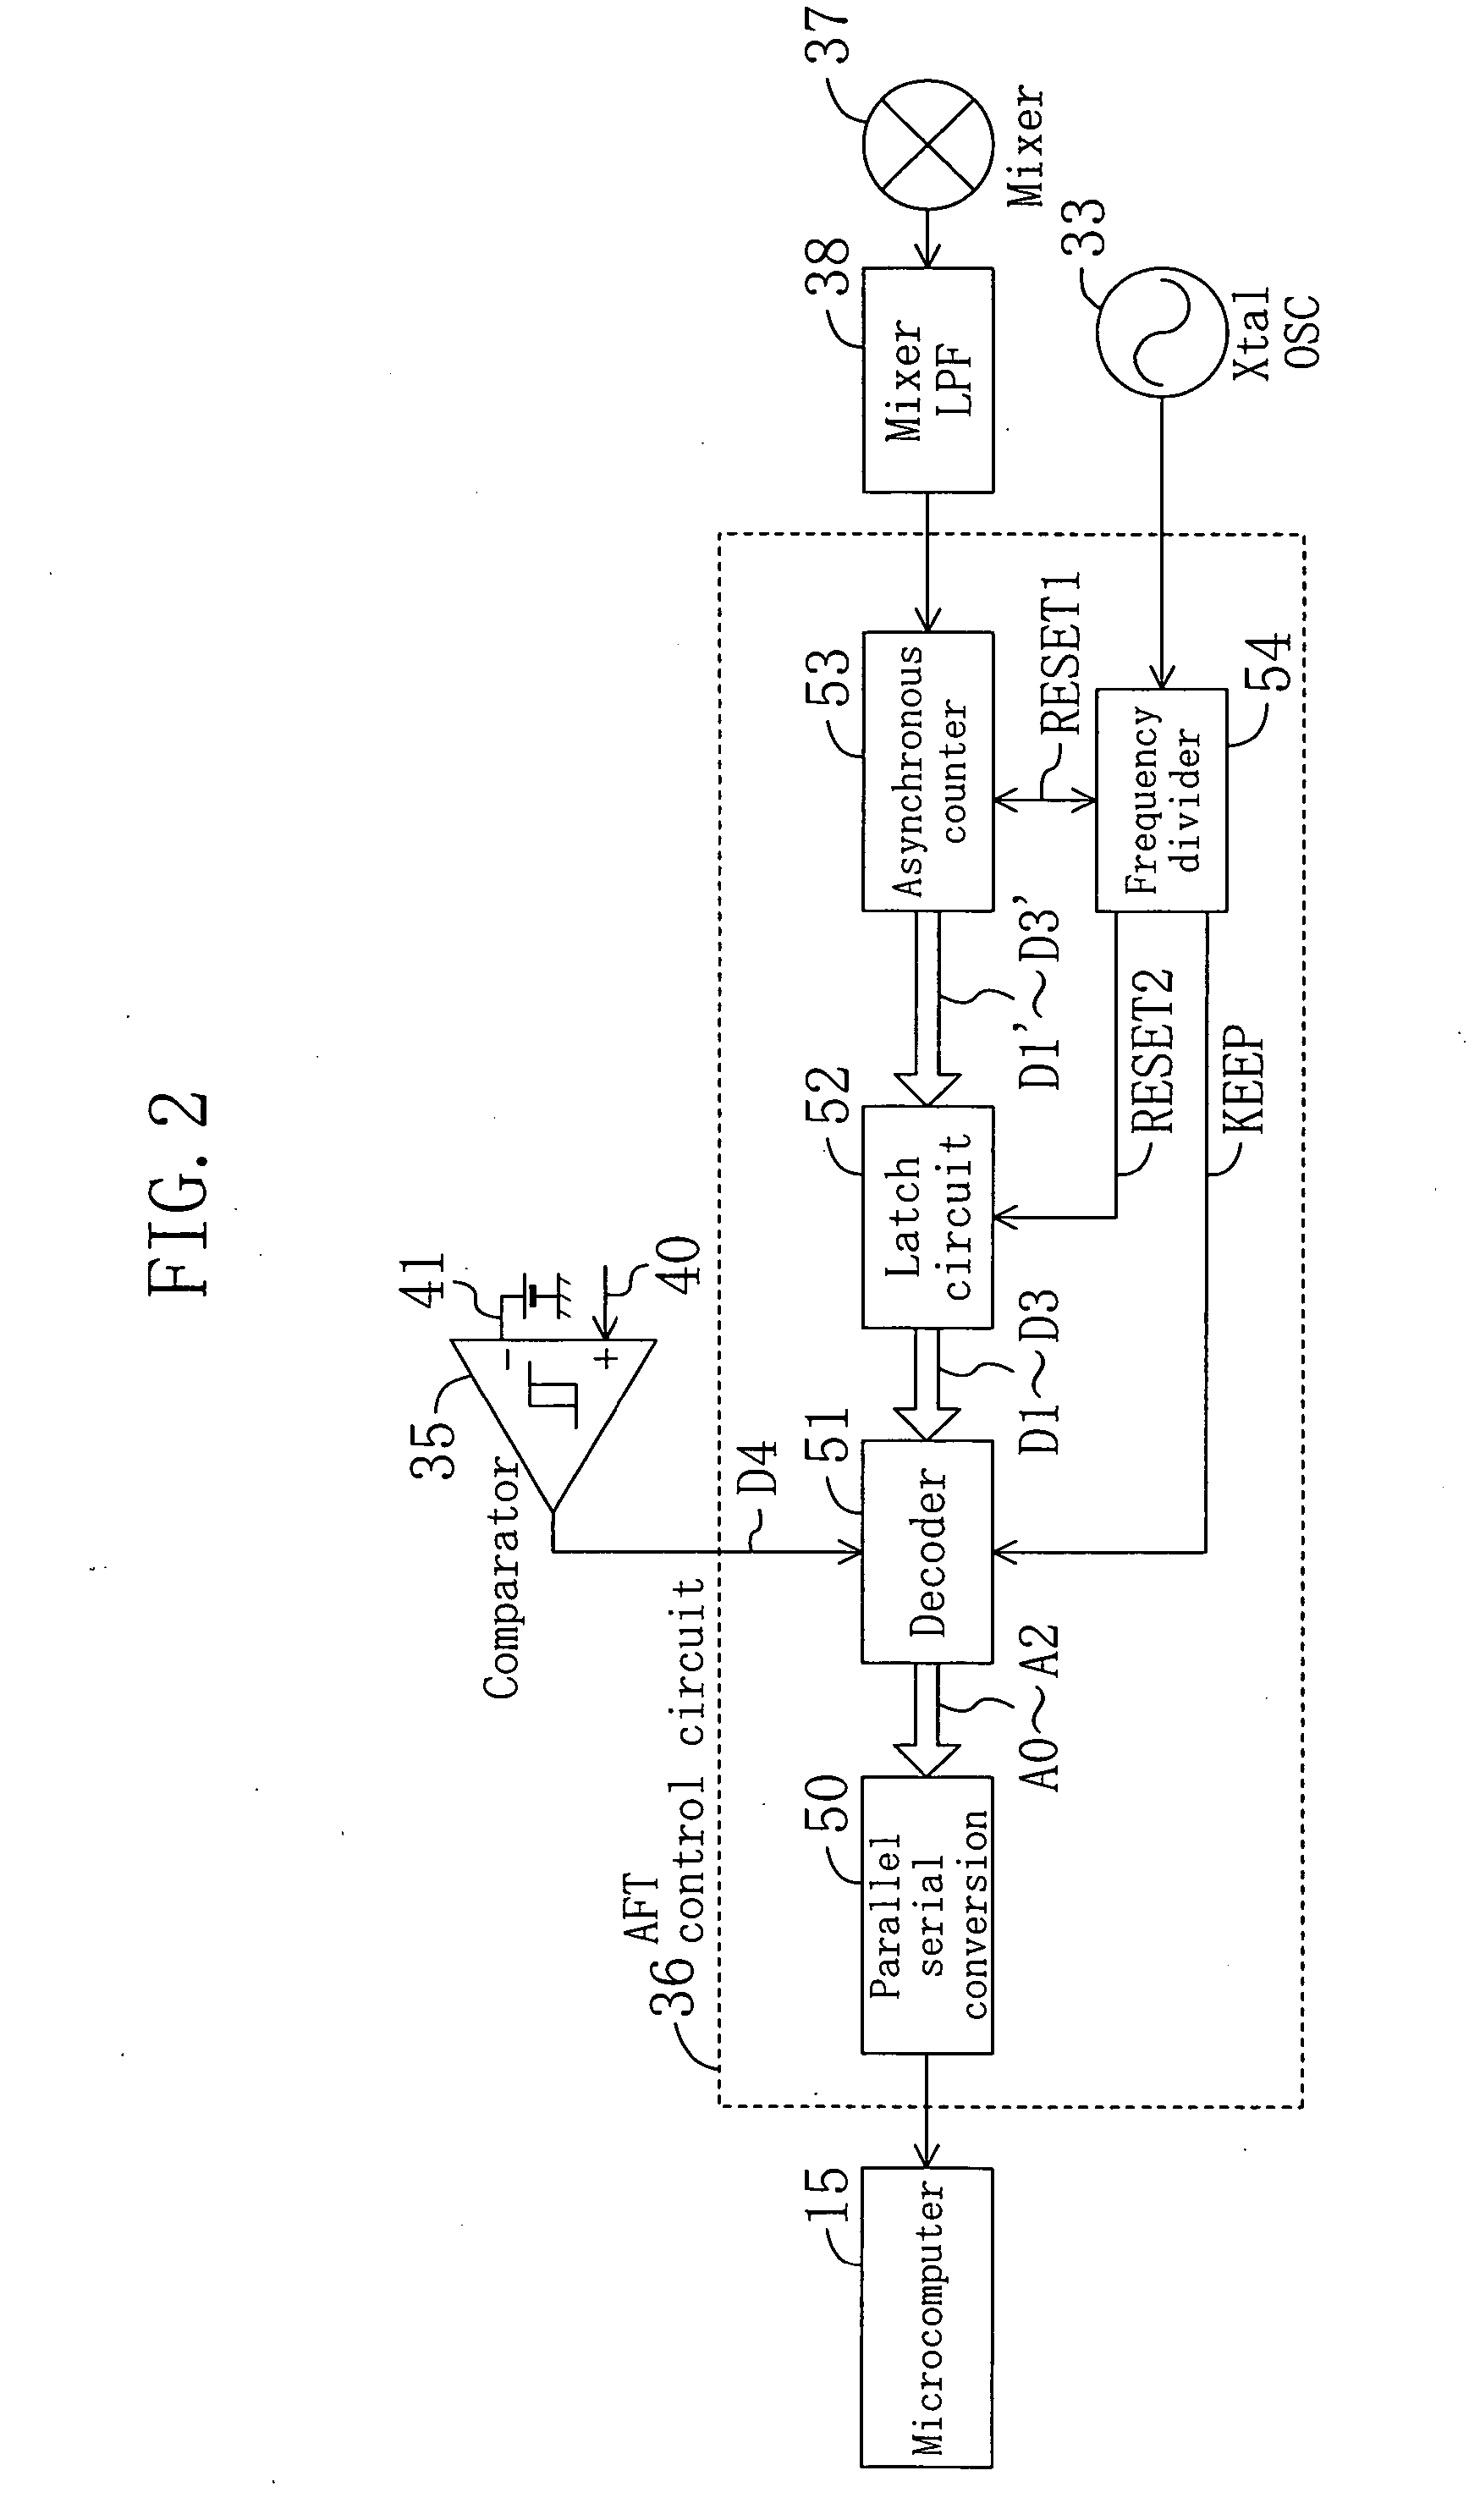 Automatic frequency tuning system